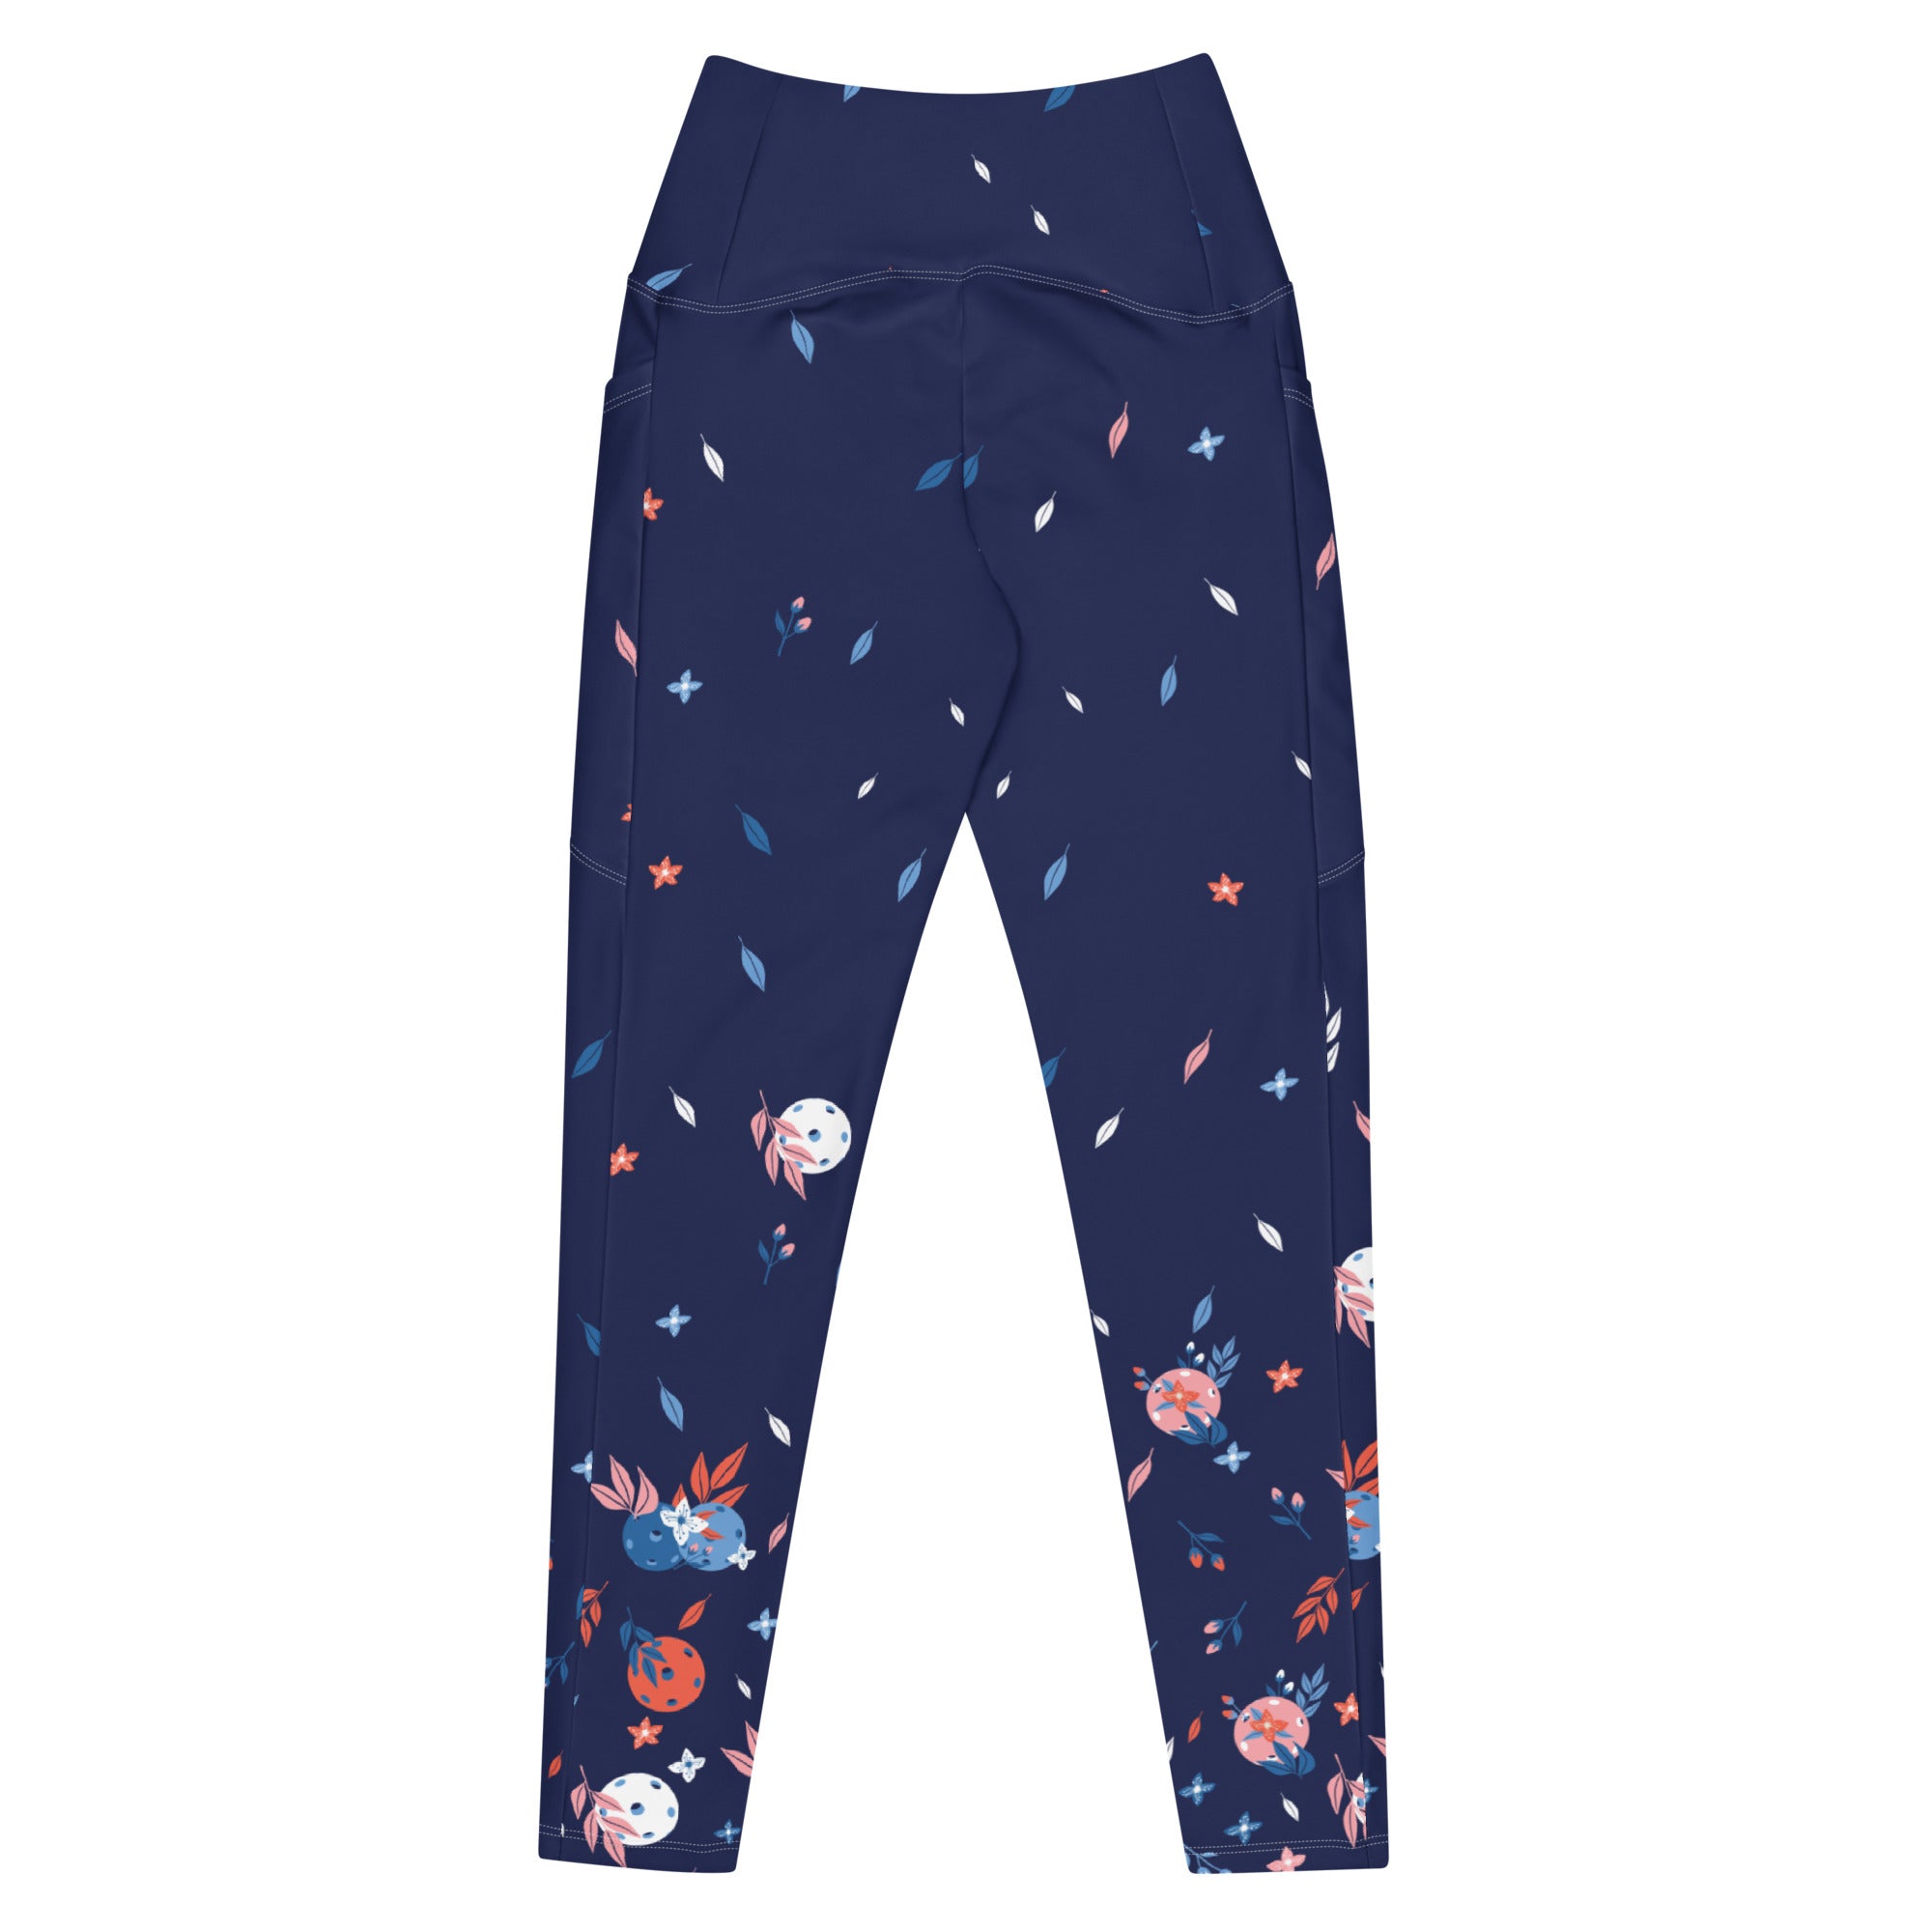 Spring Dink Gradient© Blue High-Waisted Pickleball Performance Leggings with pockets, UPF 50+